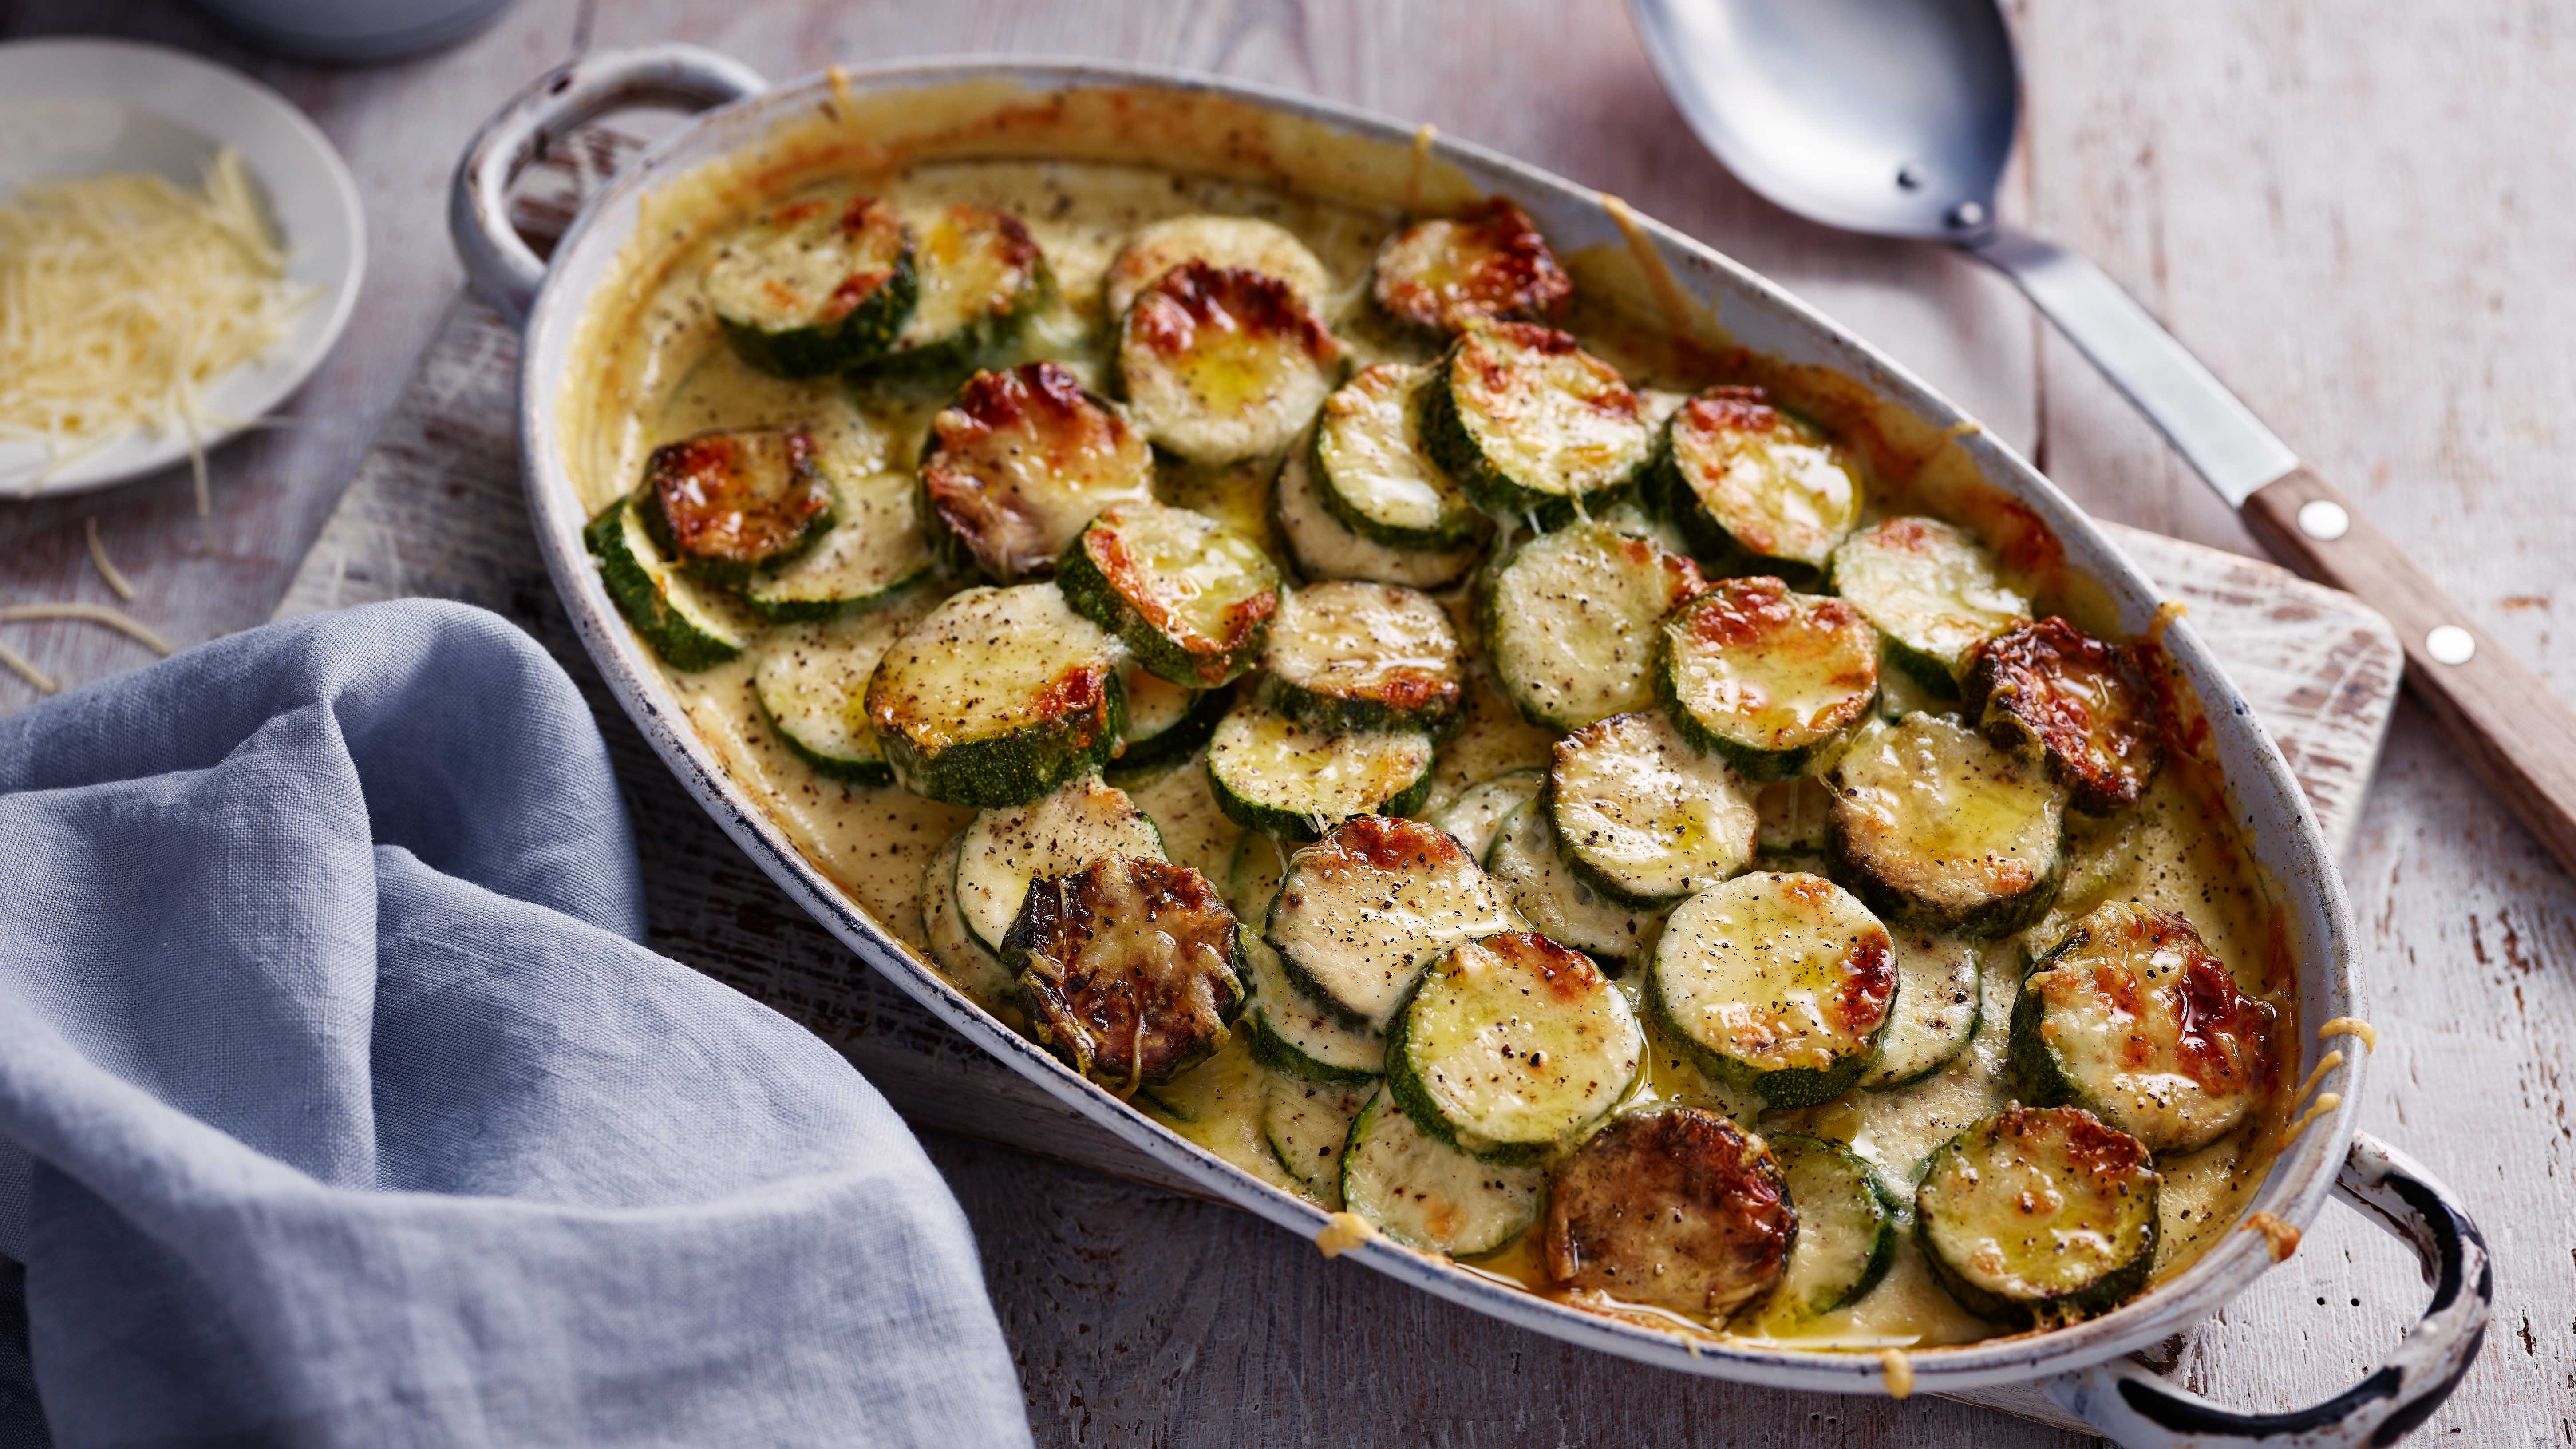 Sale > courgette oven recipes > in stock